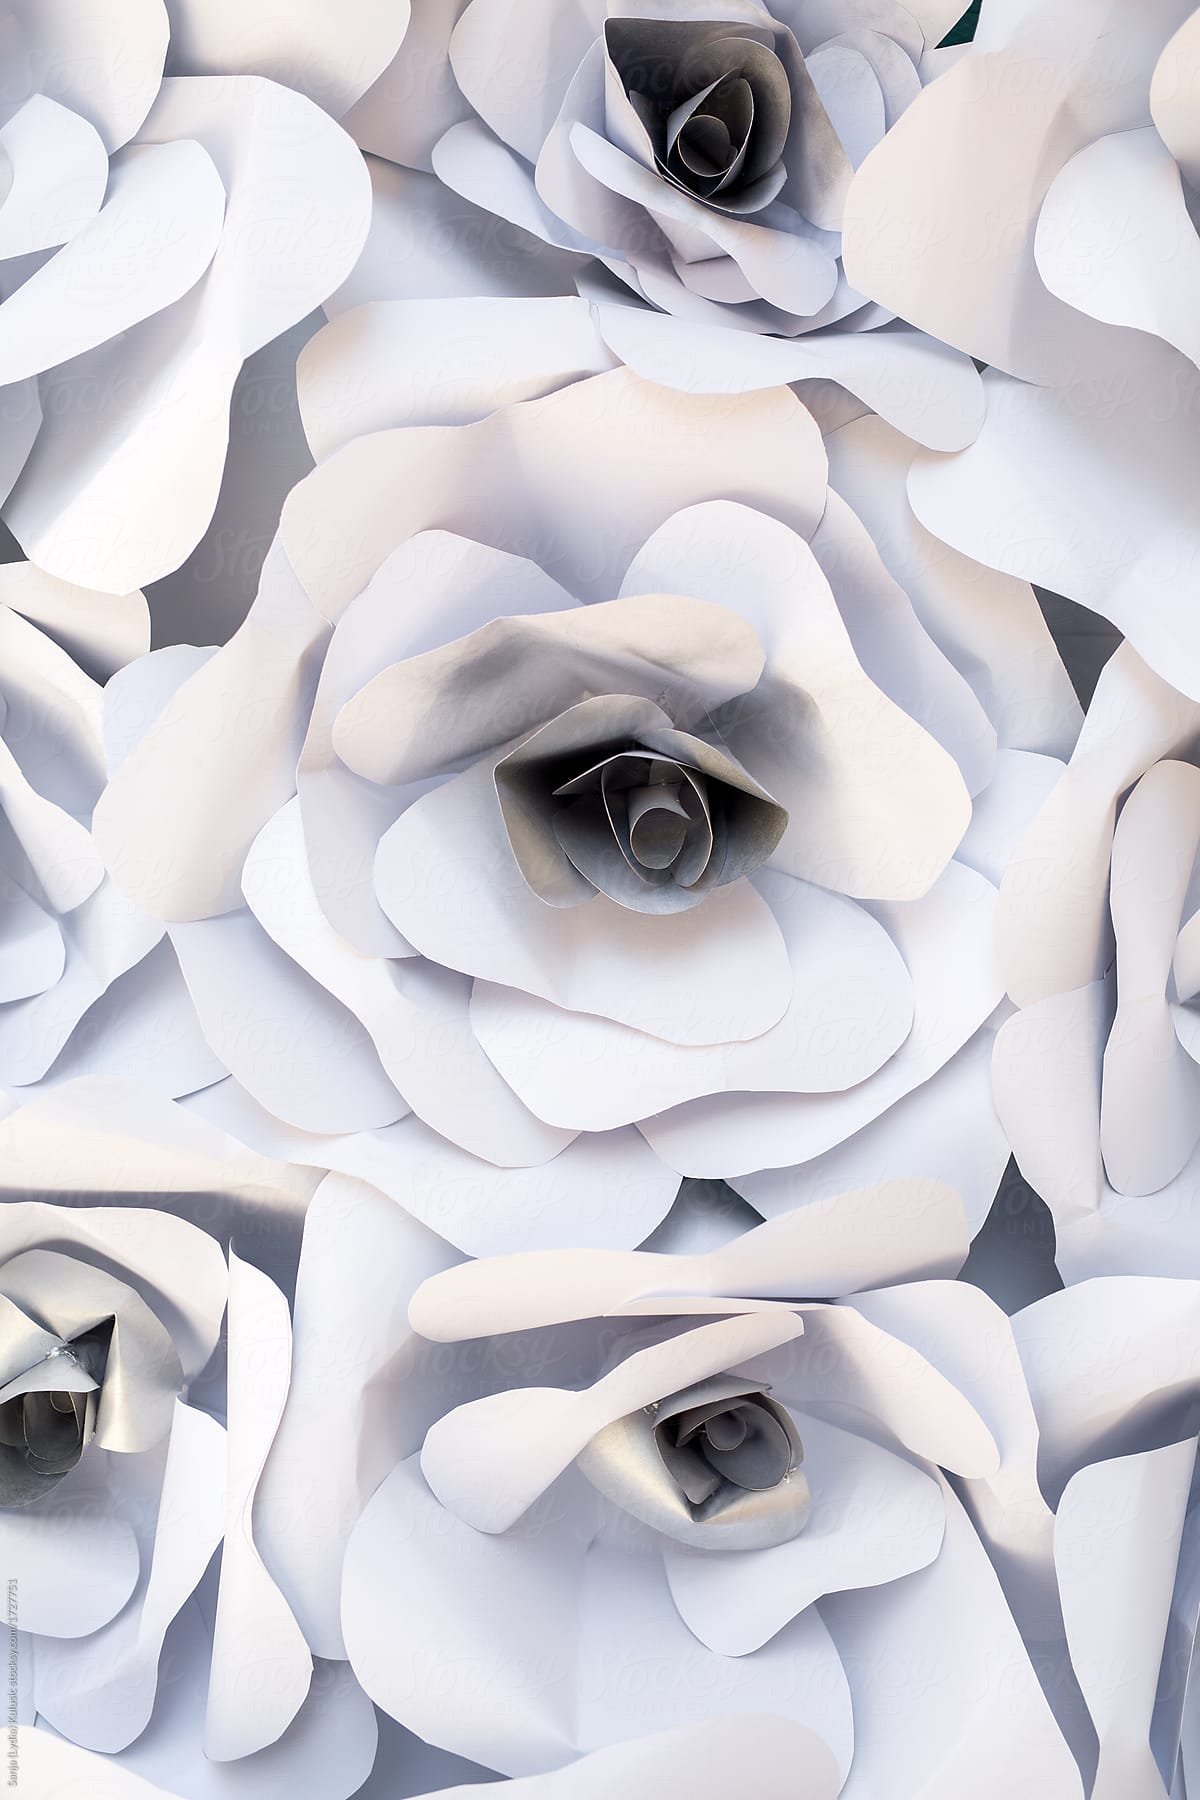 Big white floral paper art wall